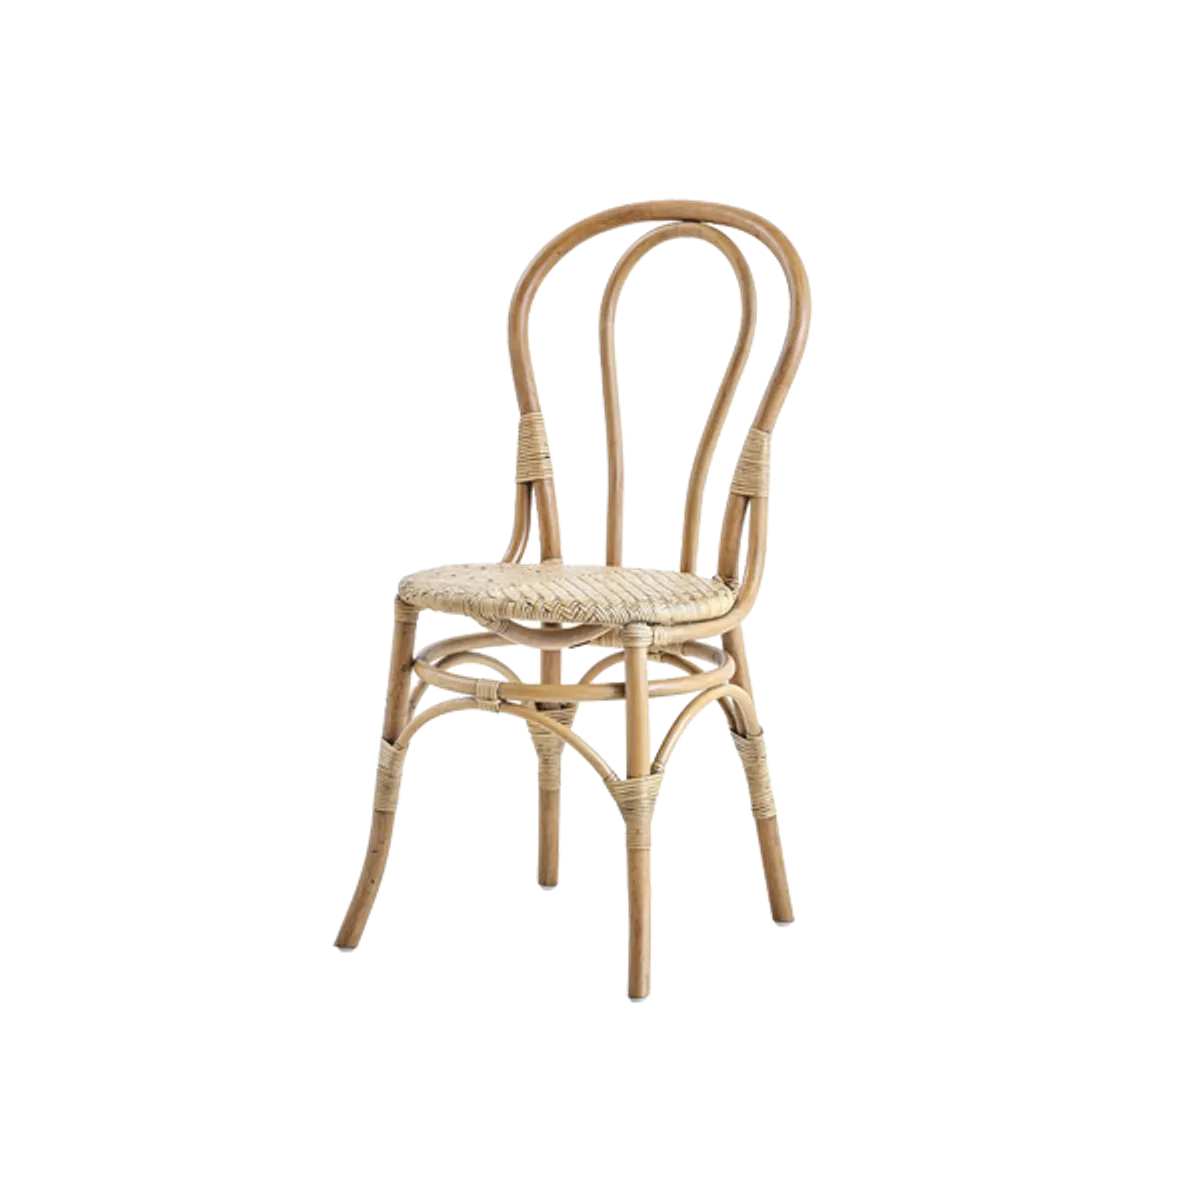 Anais Side Chair Inside Out Contracts